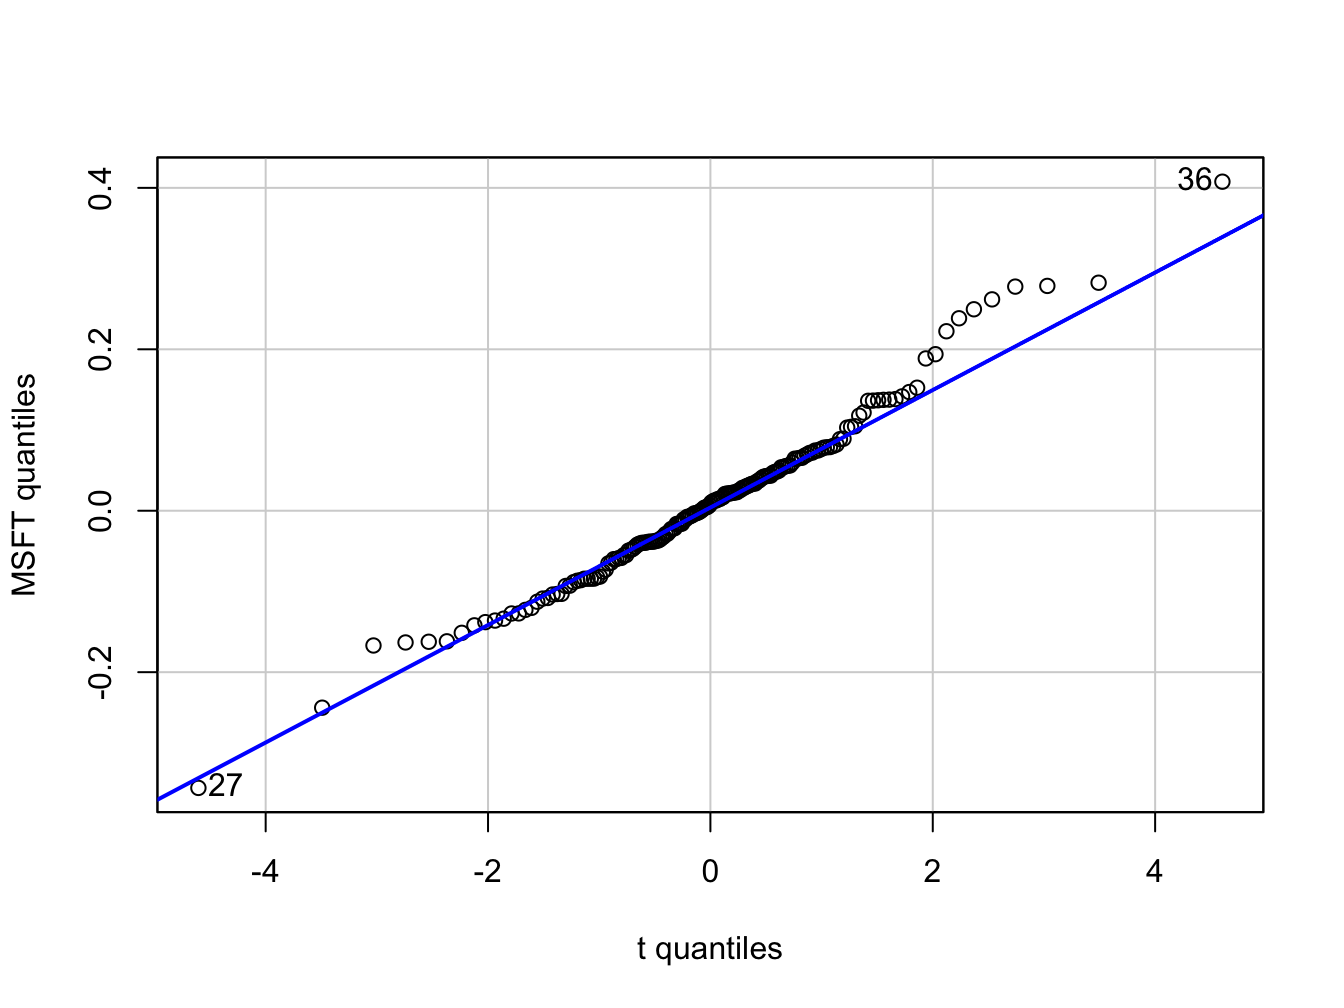 QQ-plot of Microsoft returns using Student's t distribution with 5 degrees of freedom as the reference distribution.